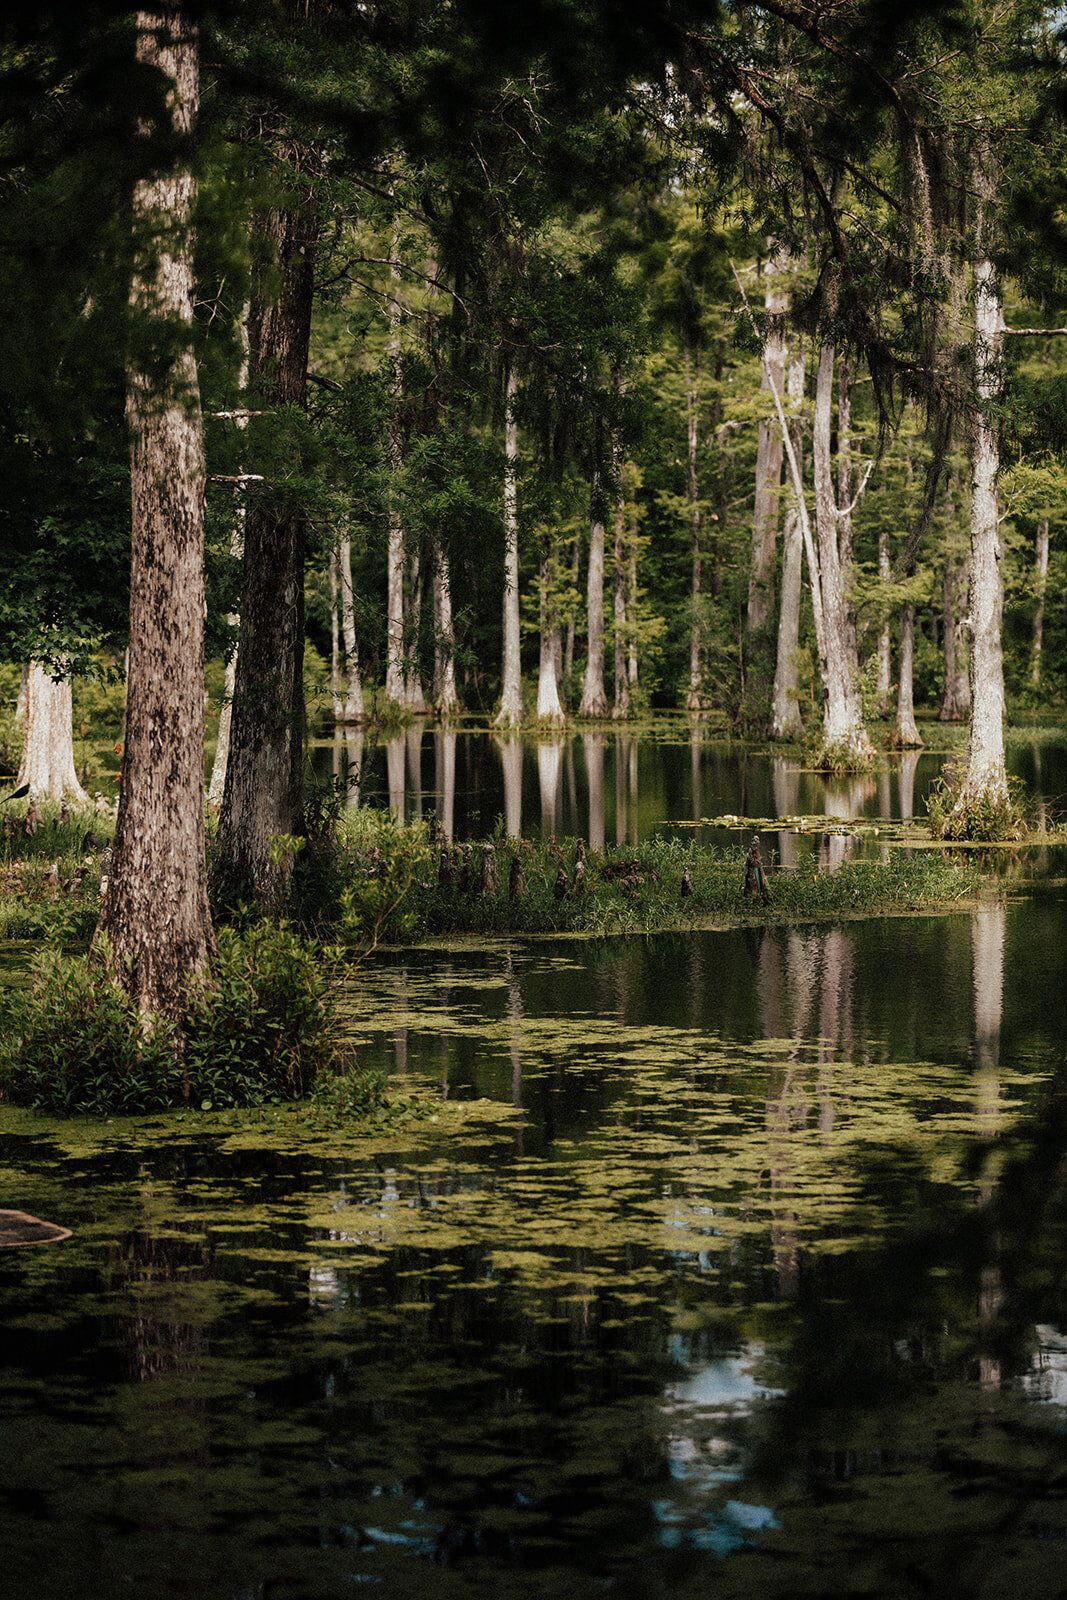 Cypress garden swamp. Trees shoot out of the water. Water lilies are covering the surface